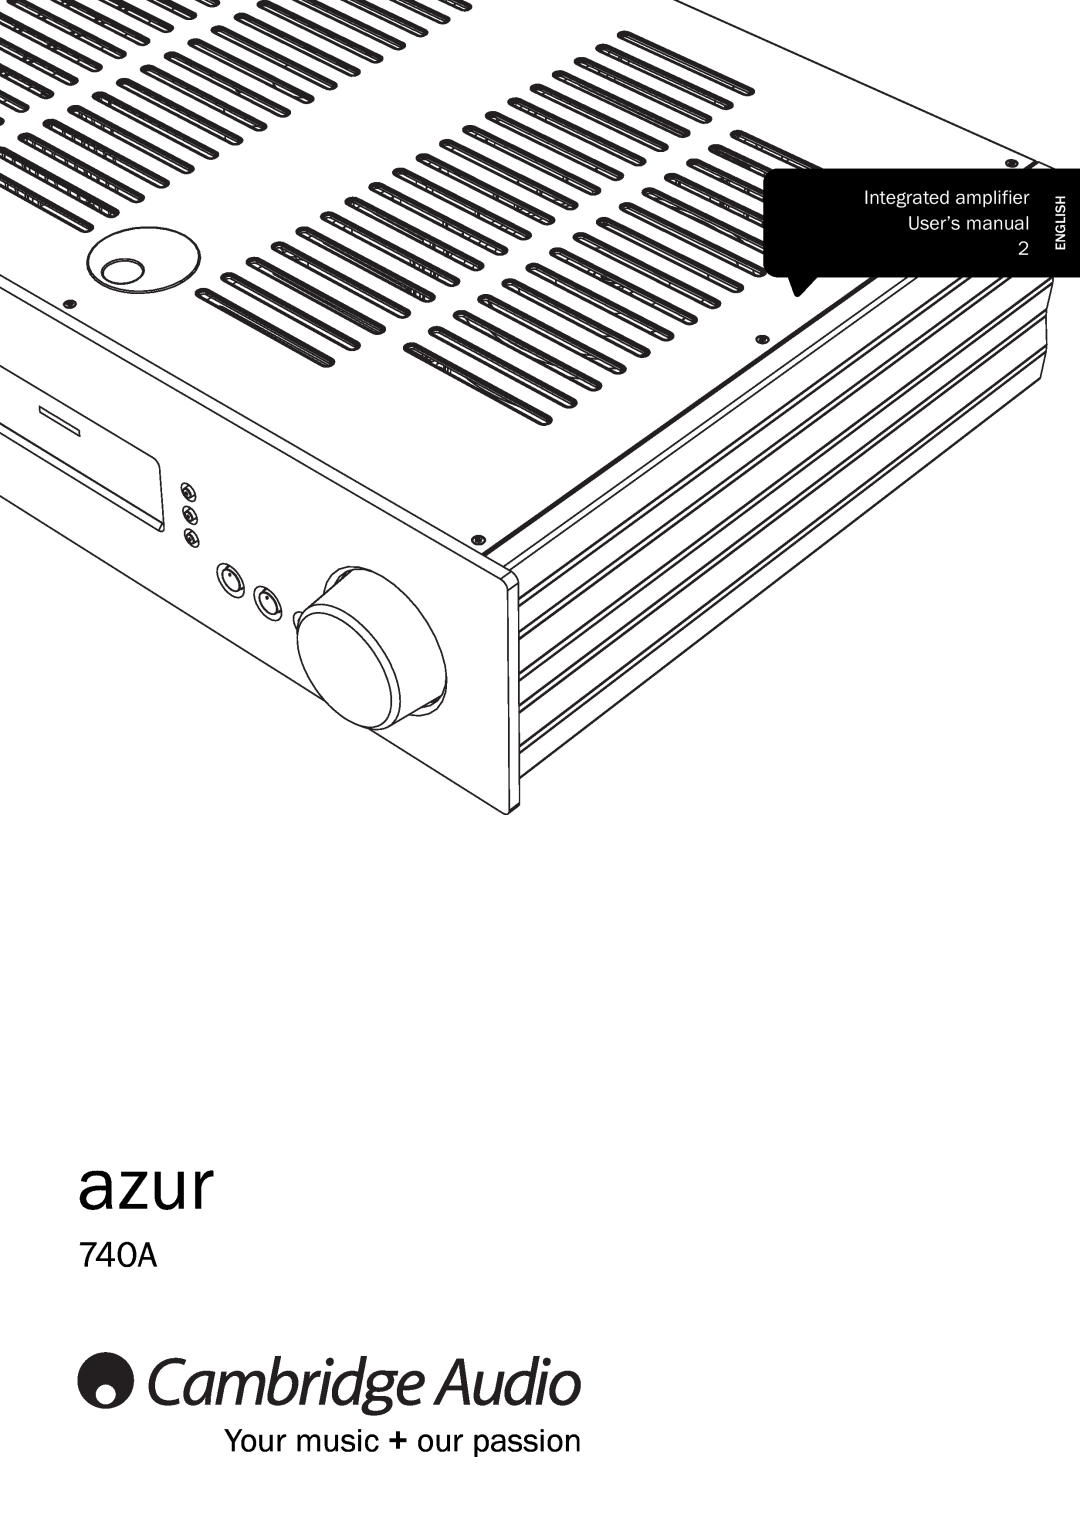 Cambridge Audio Azur 740A user manual azur, Your music + our passion, English 